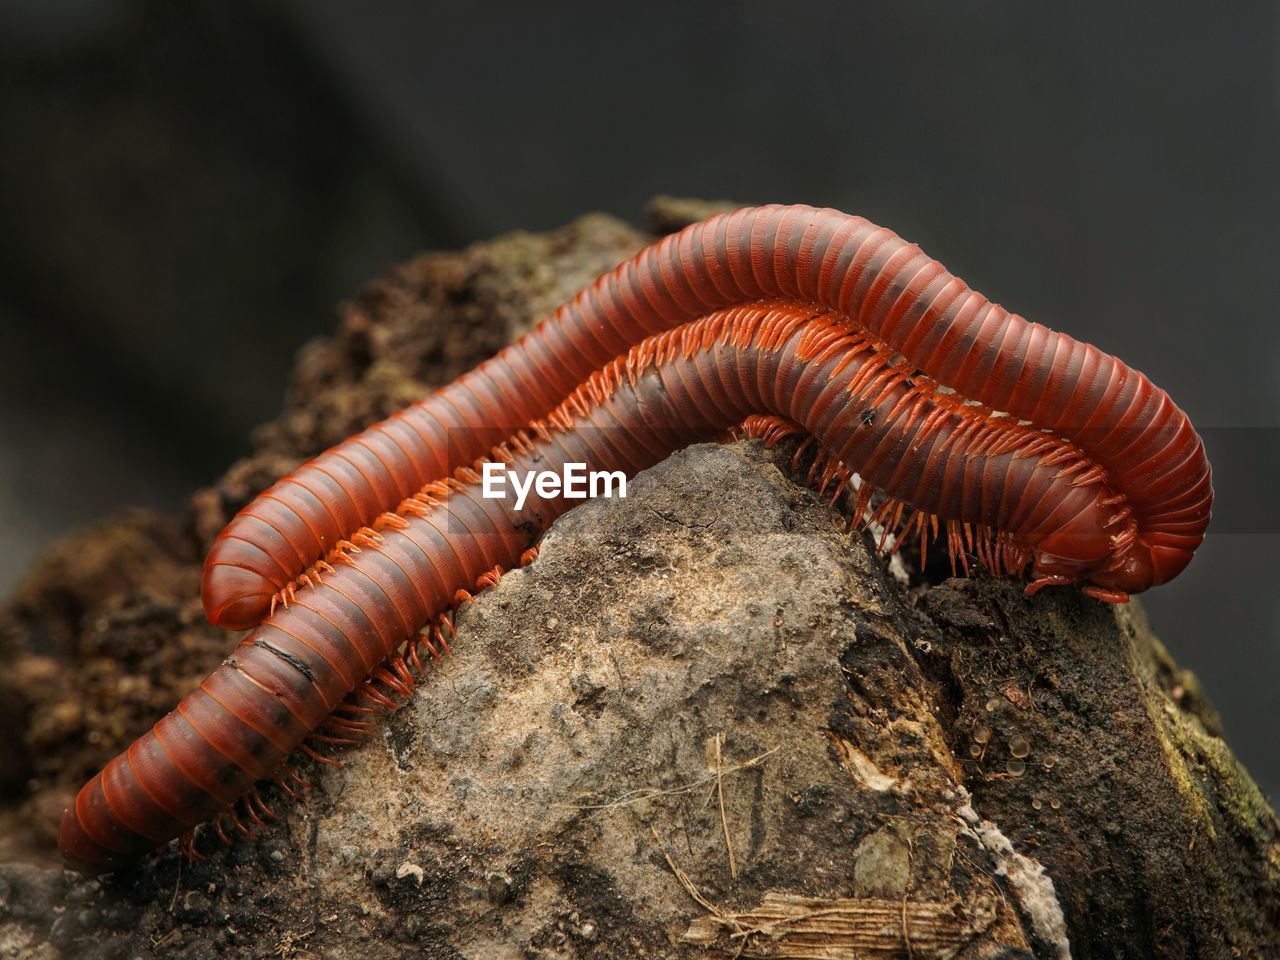 Macro photo of insects, millipedes.